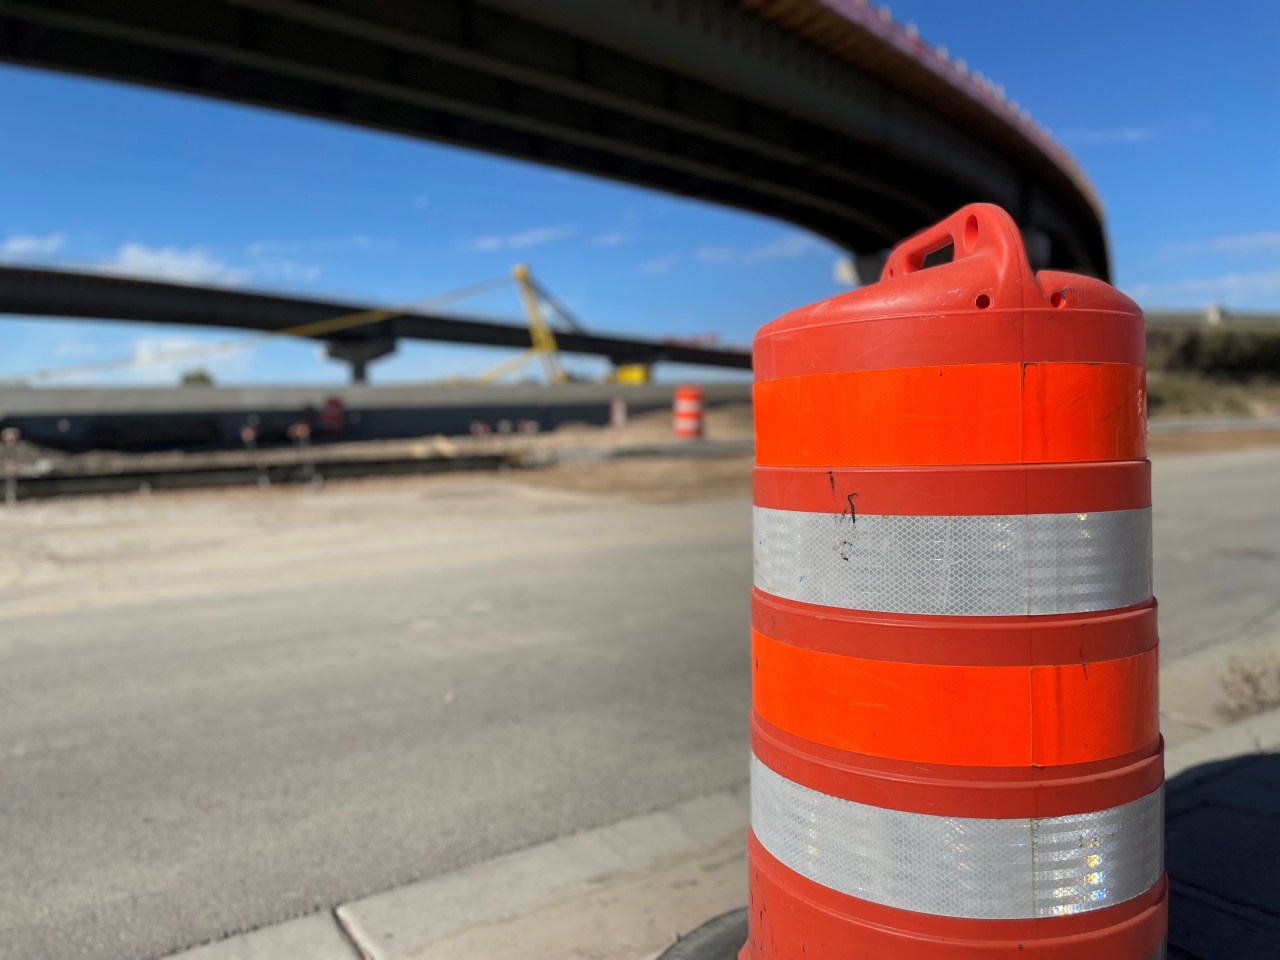 UDOT begins major construction season - here are the projects you should know